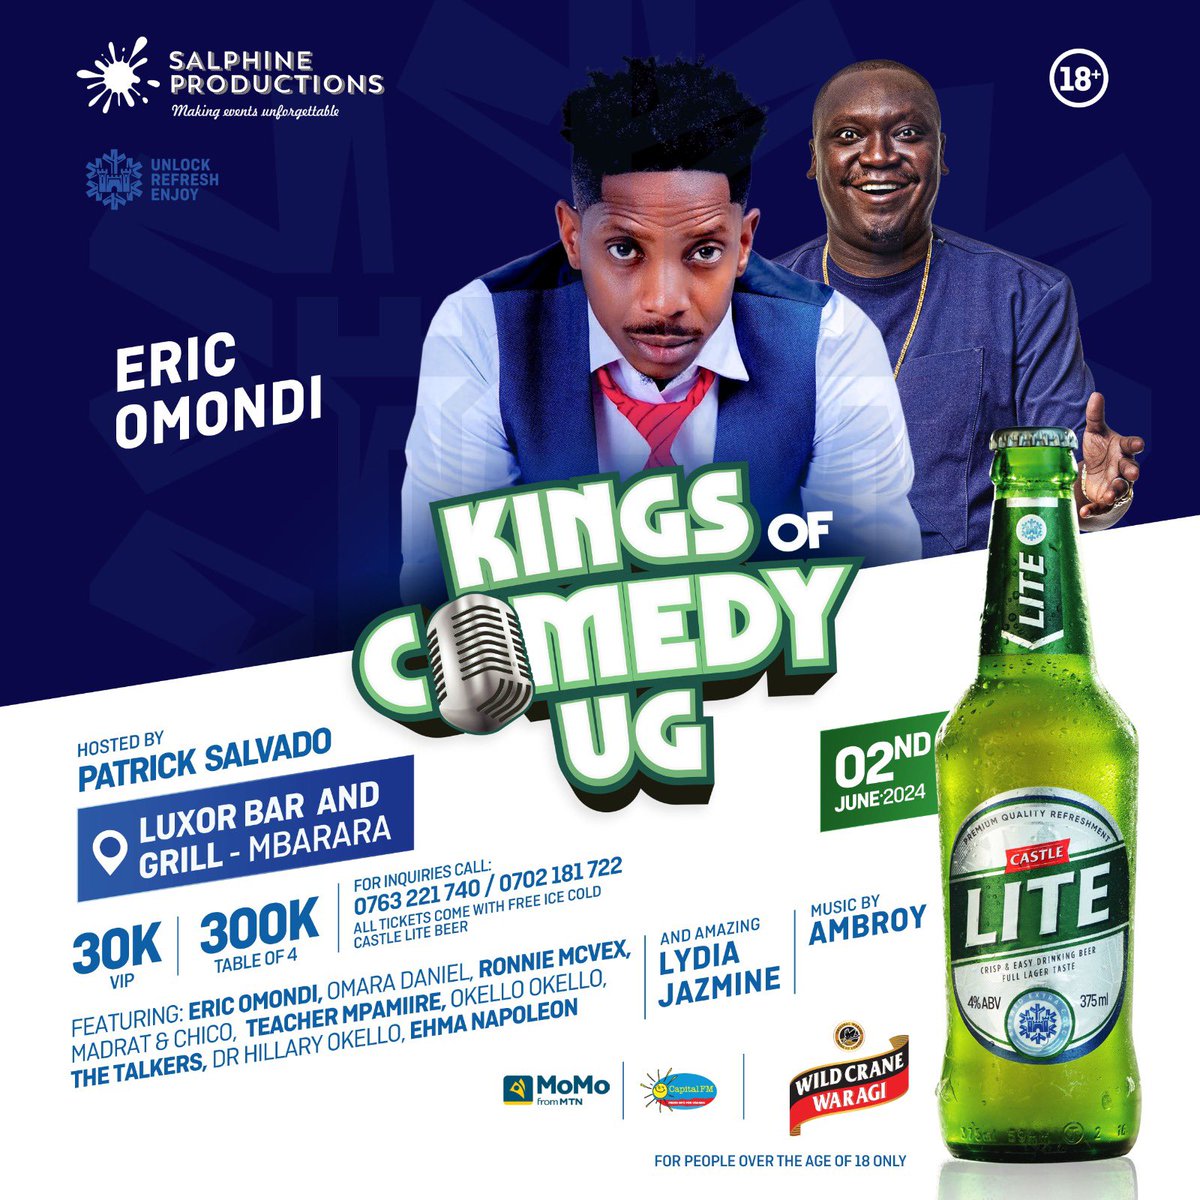 There’s nothing in the world so irresistibly contagious as laughter and good humor and guess what? My Mbarara peeps, you can’t afford to miss the hilarious @ericomondi_ from Kenya on 2nd June @LuxorBarMbra with the #KingsOfComedyUG, book your table now!!!